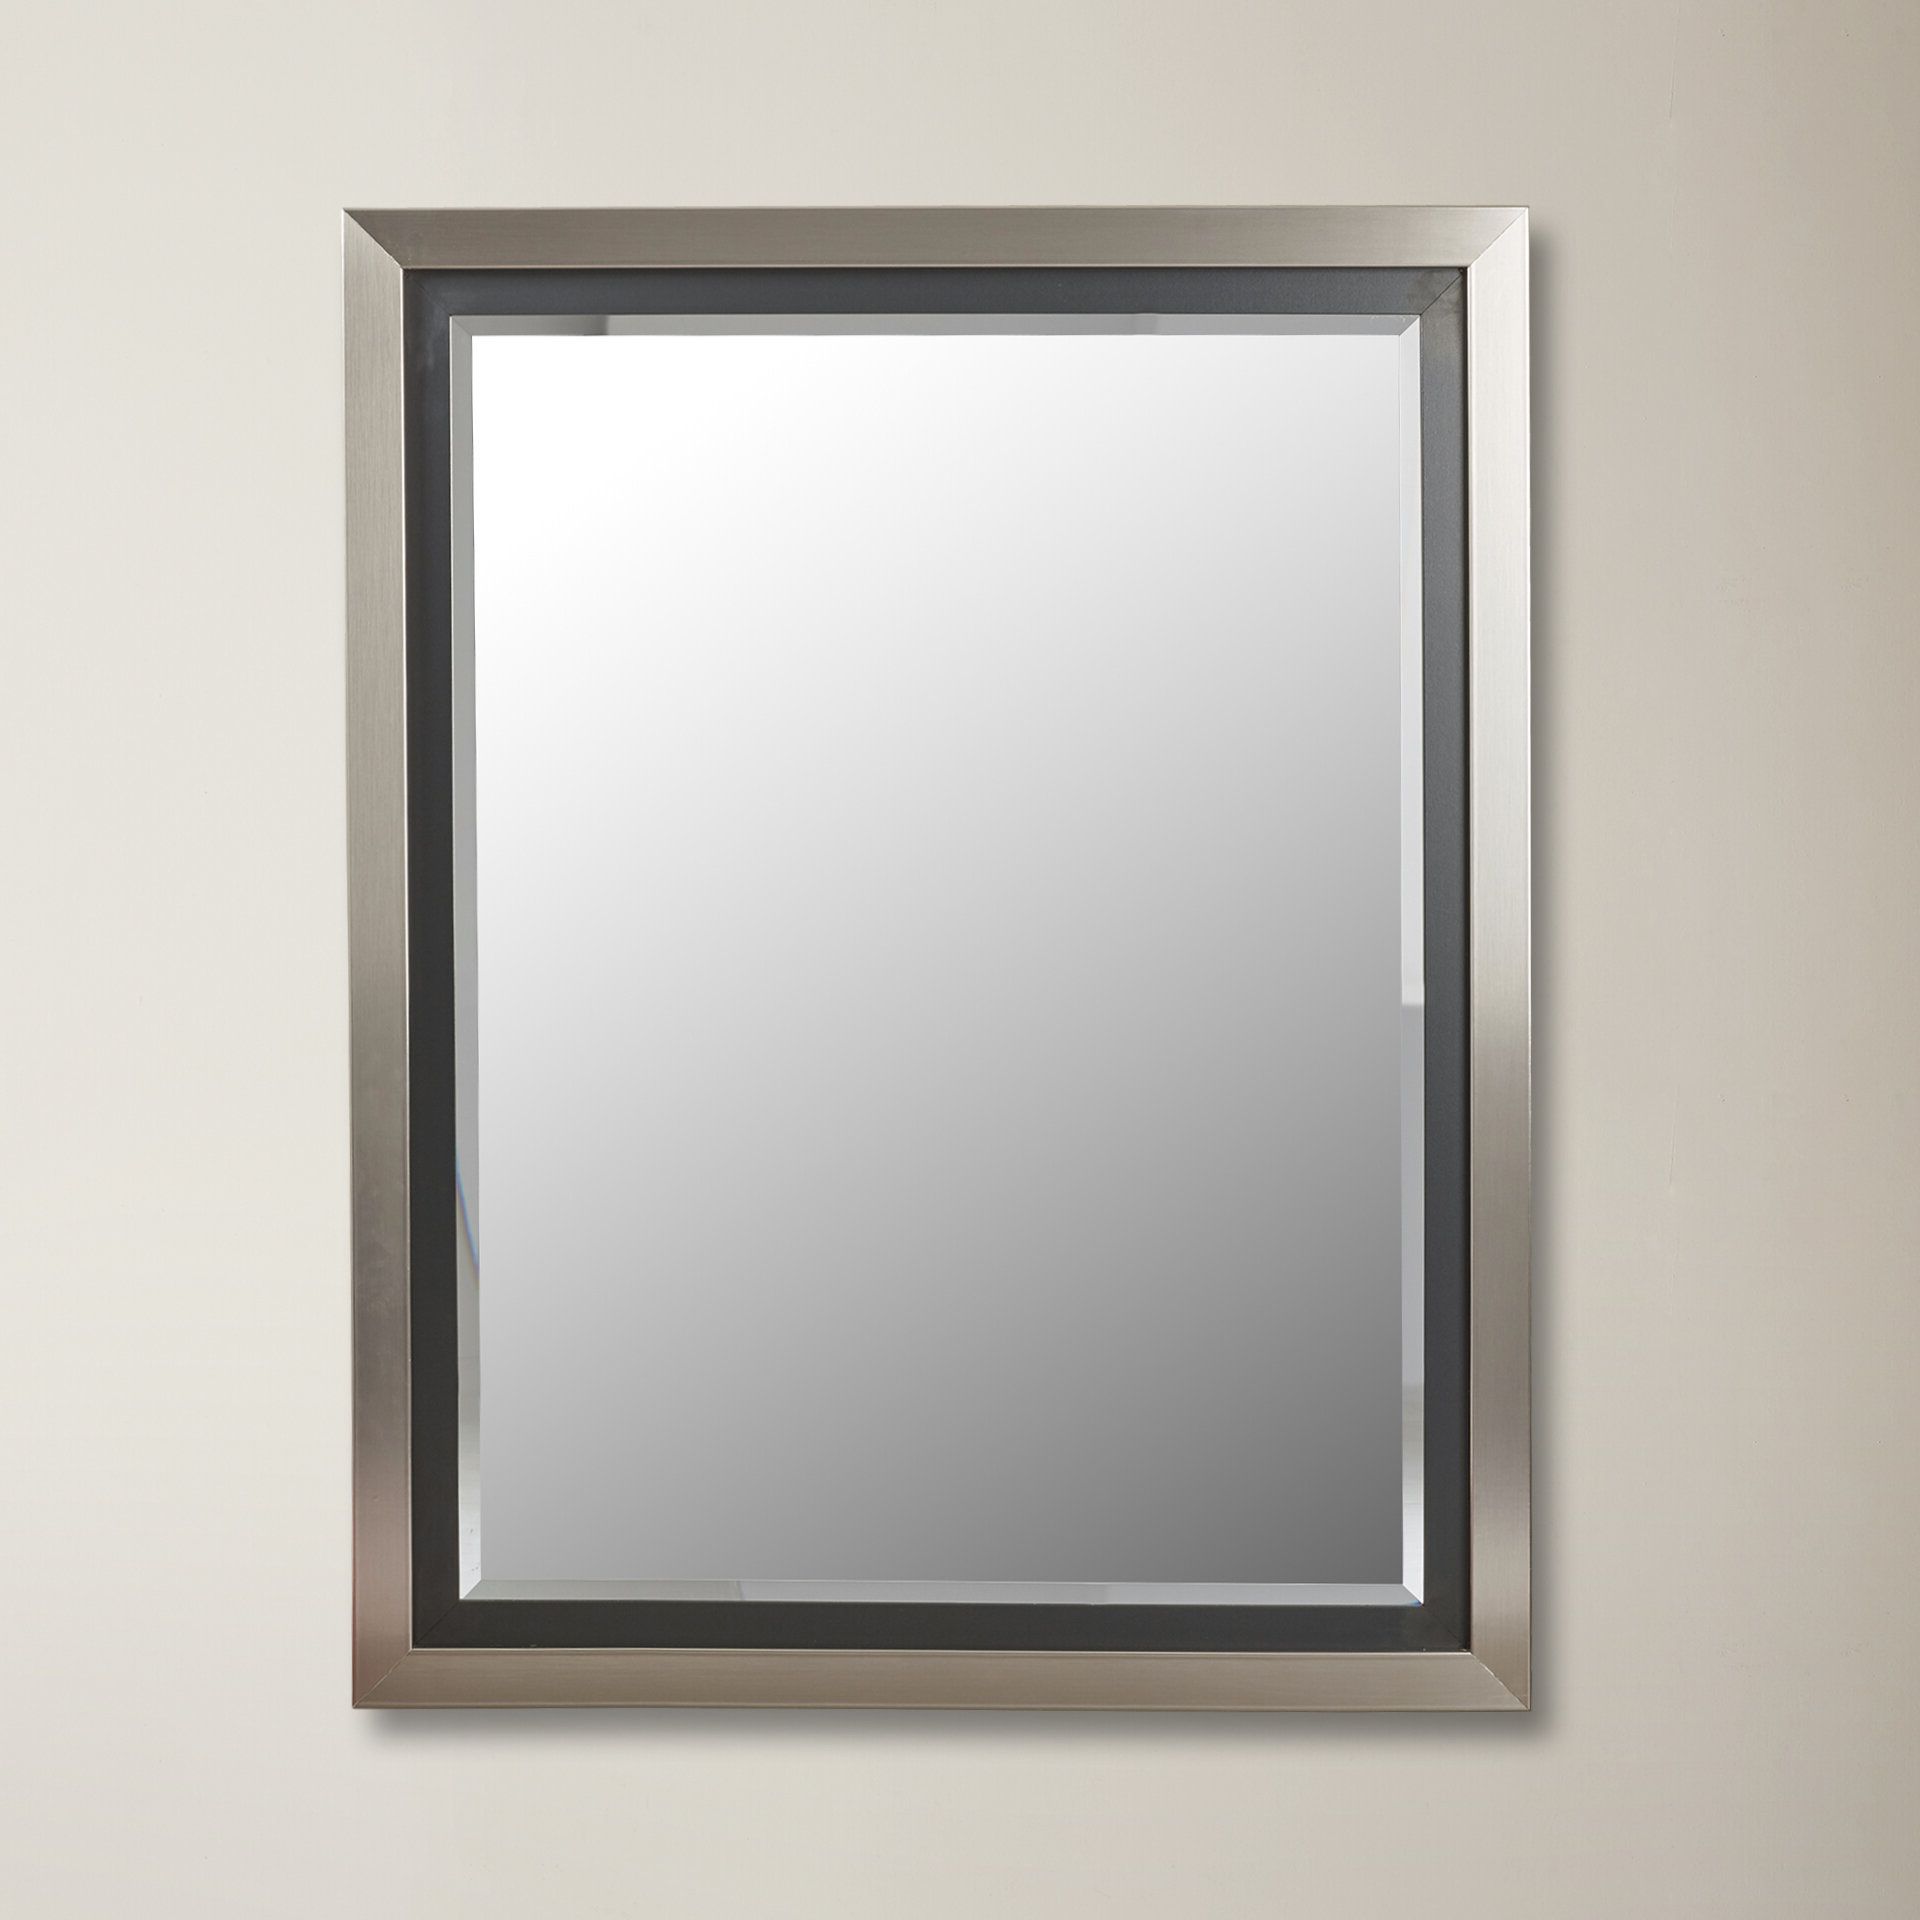 Drake Brushed Steel Wall Mirrors For Fashionable Wade Logan Brushed Nickel Silver And Satin Black Wide Flat Wall Mirror (View 8 of 15)